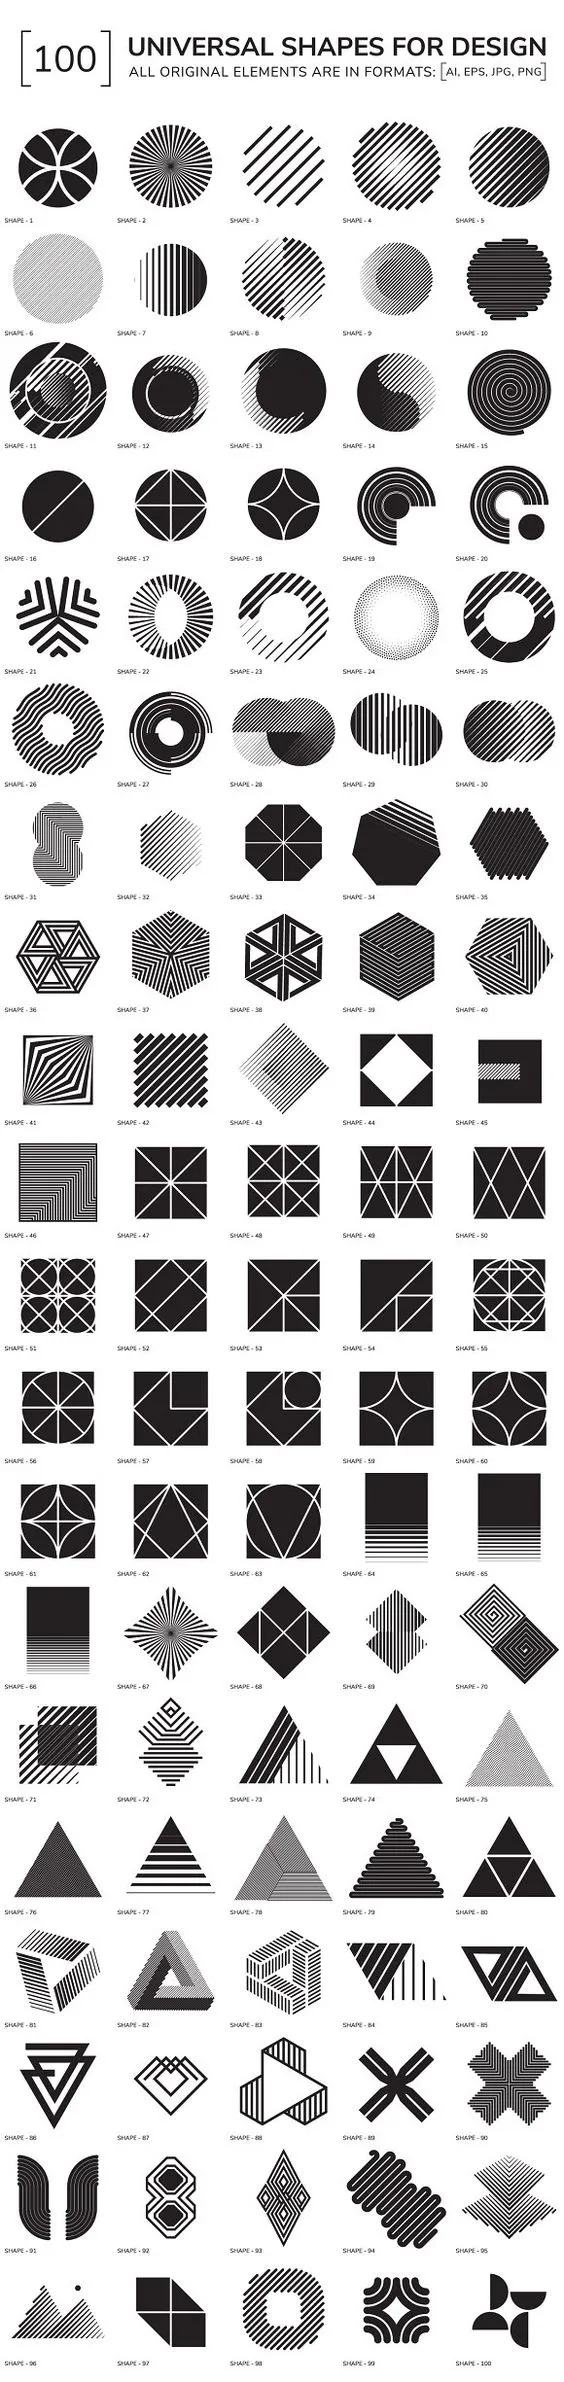 #DE15-417A new geometric design every dayBuy my posters on LinxSupply  第11张